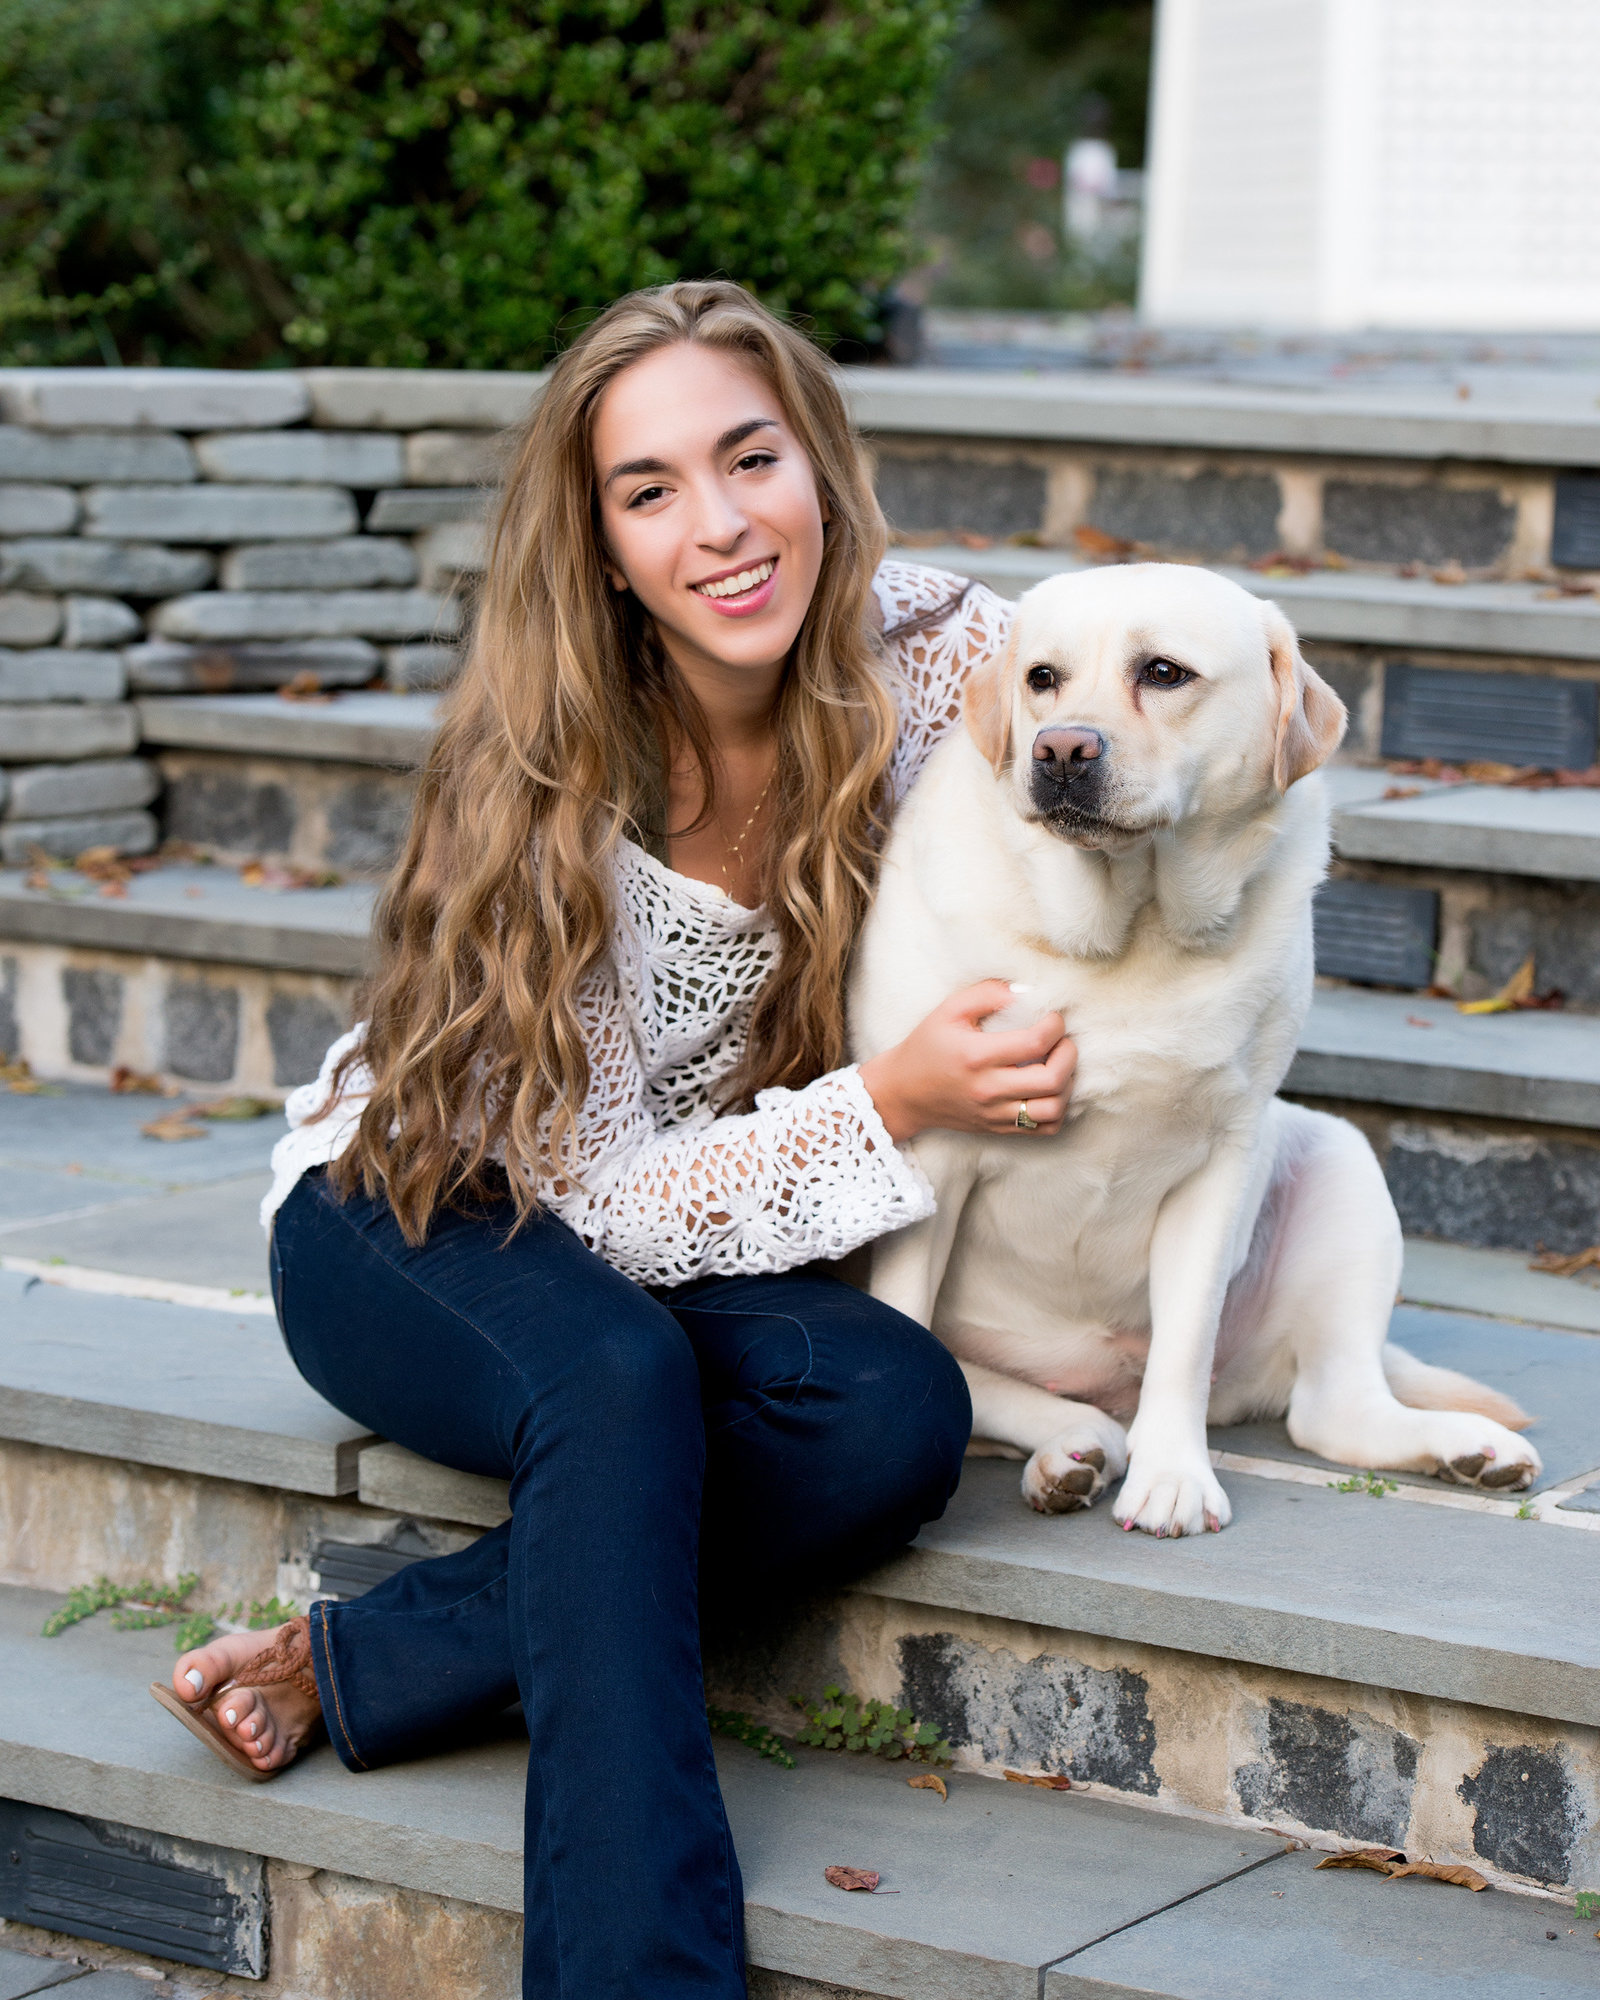 Fun Senior portraits by Dottie Foley Photography | Chester County Senior Photographer serving the Main Line including West Chester